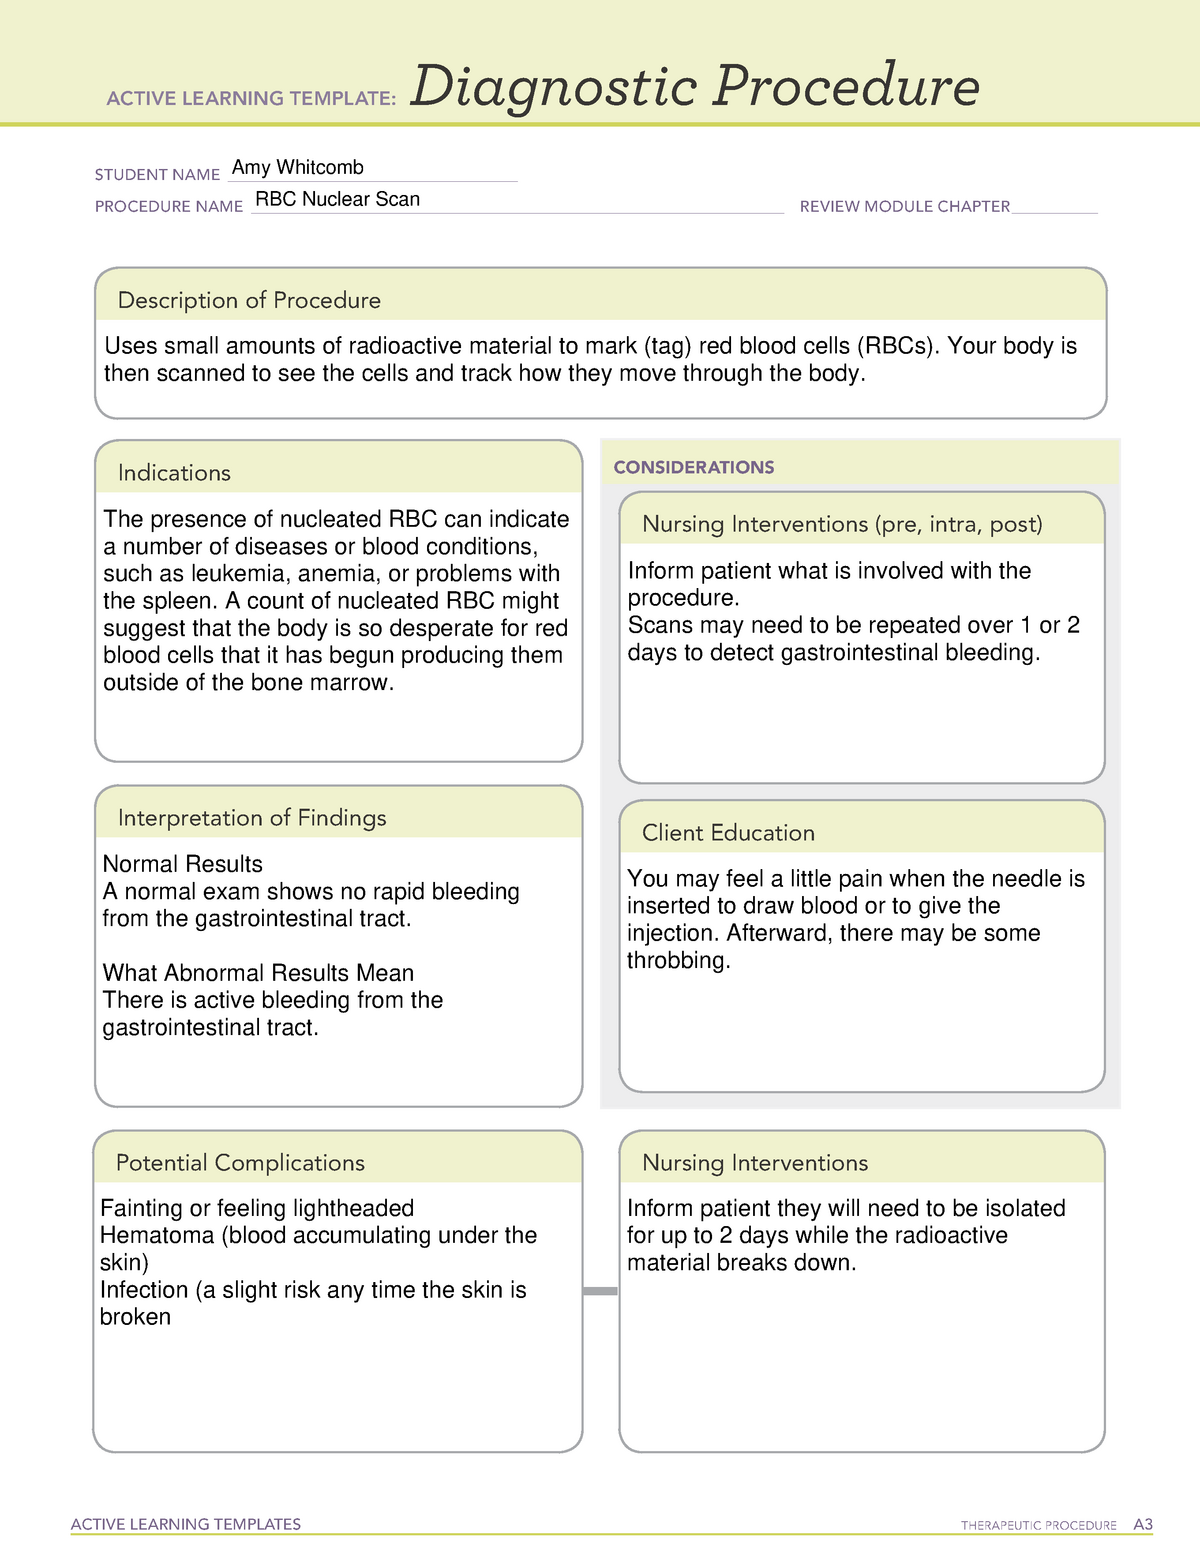 ATI RBC Nuclear Scan Diagnostic Procedure Sheet ACTIVE LEARNING